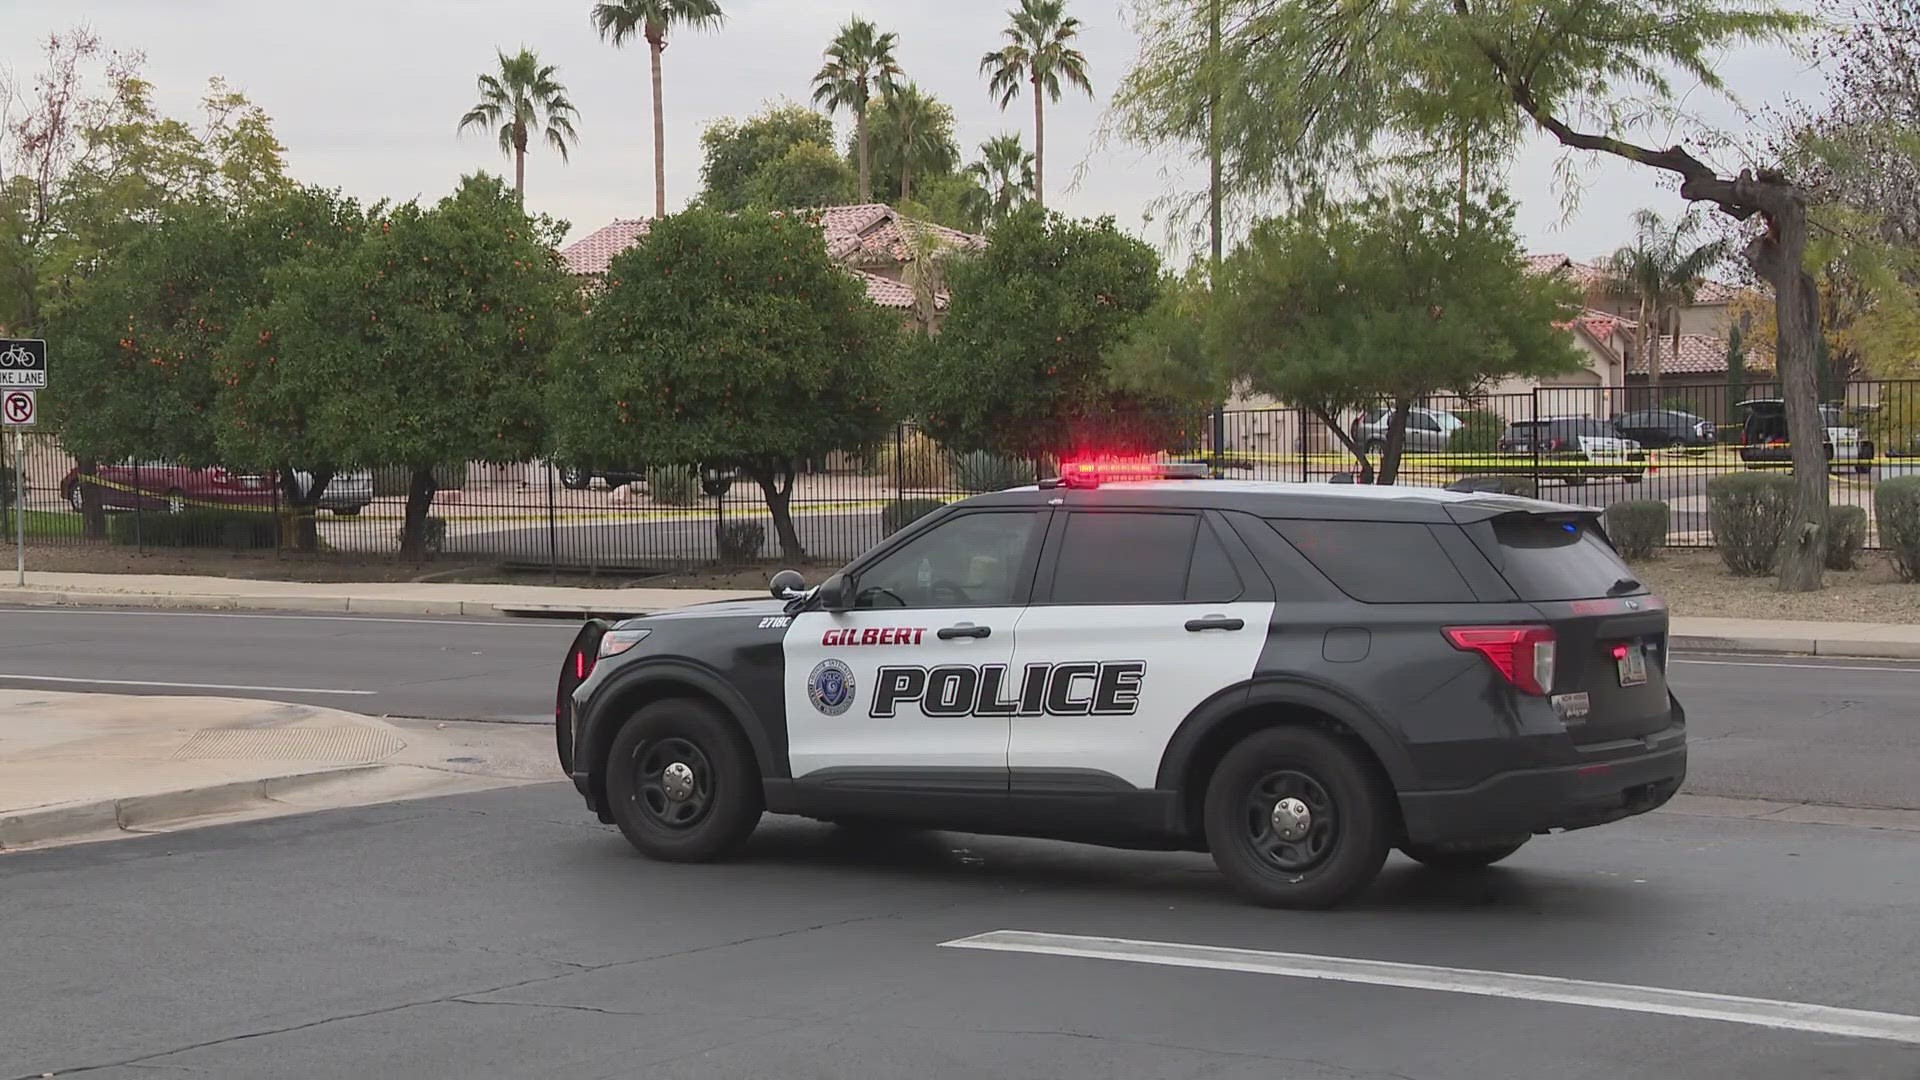 Gilbert police have shot and killed a man armed with a handgun and a rifle who approached officers, according to authorities.